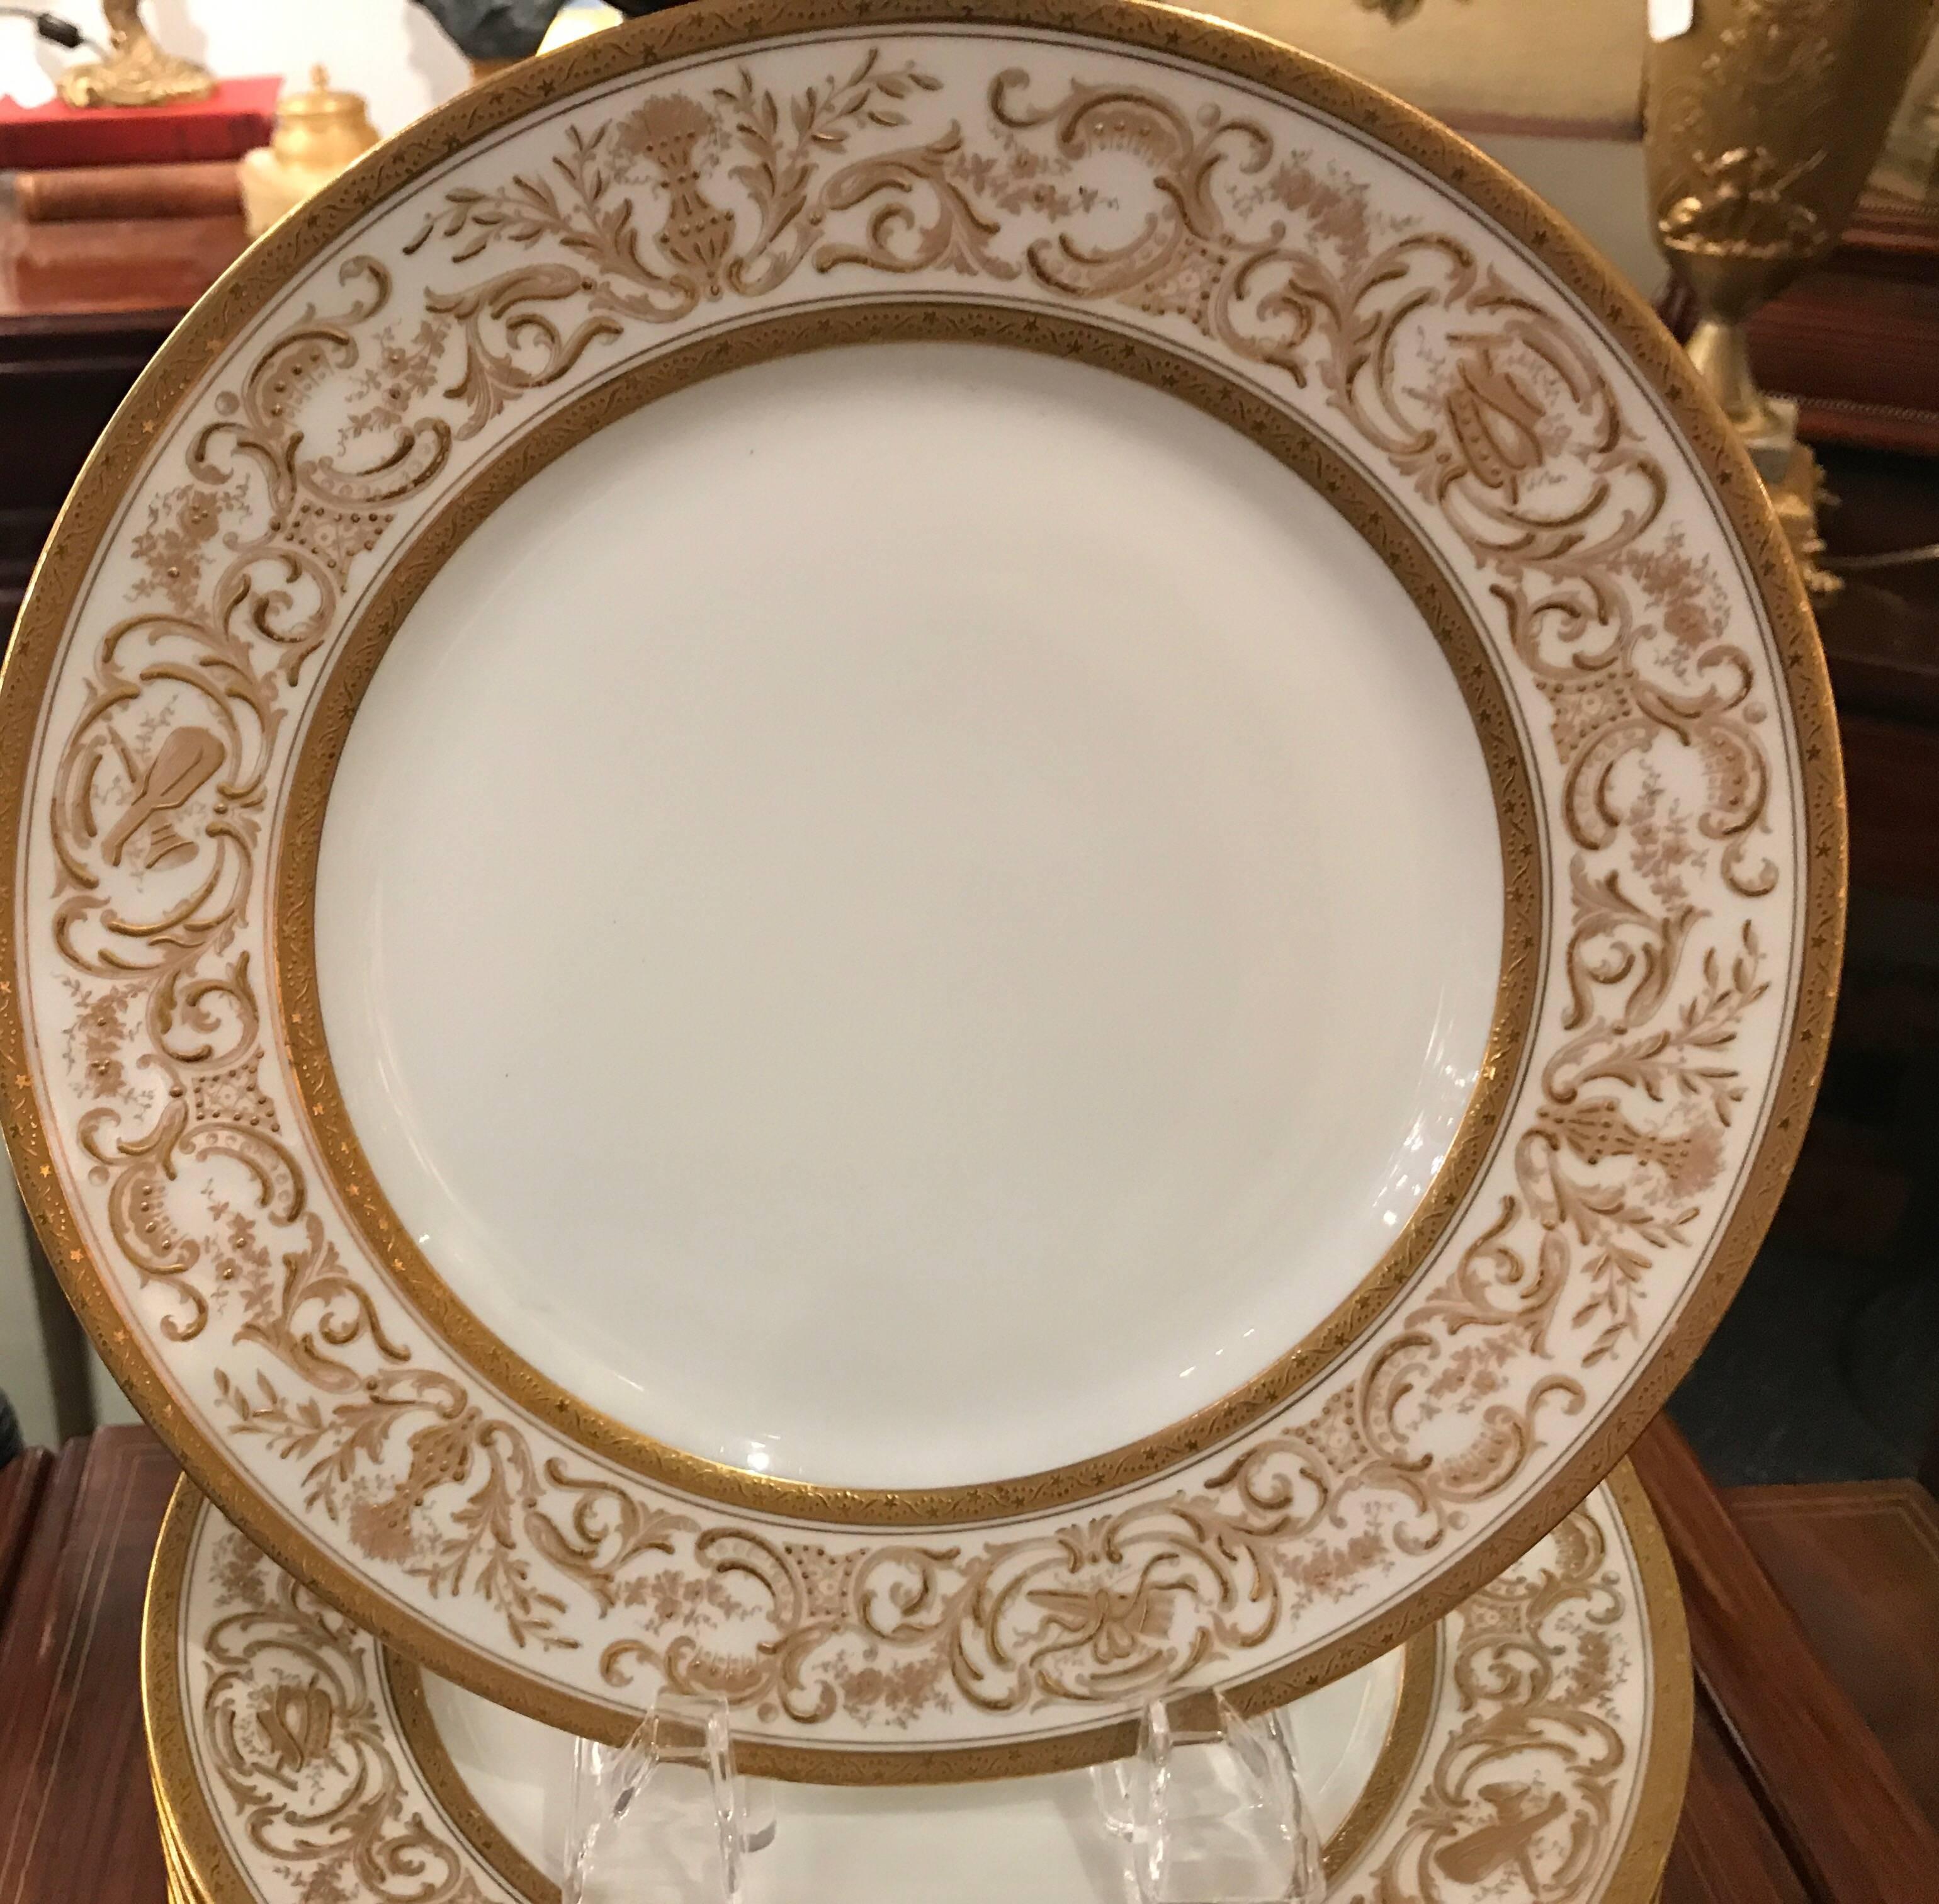 Ten hand gilt 10 inch plates by Charles Ahrenfeldt Limoges and retailed by Bailey Banks and Biddle of Philadelphia.

Charles Ahrenfeldt (1807-94) was born in Germany. He began importing porcelain into New York City in the 1830s. During the 1840s